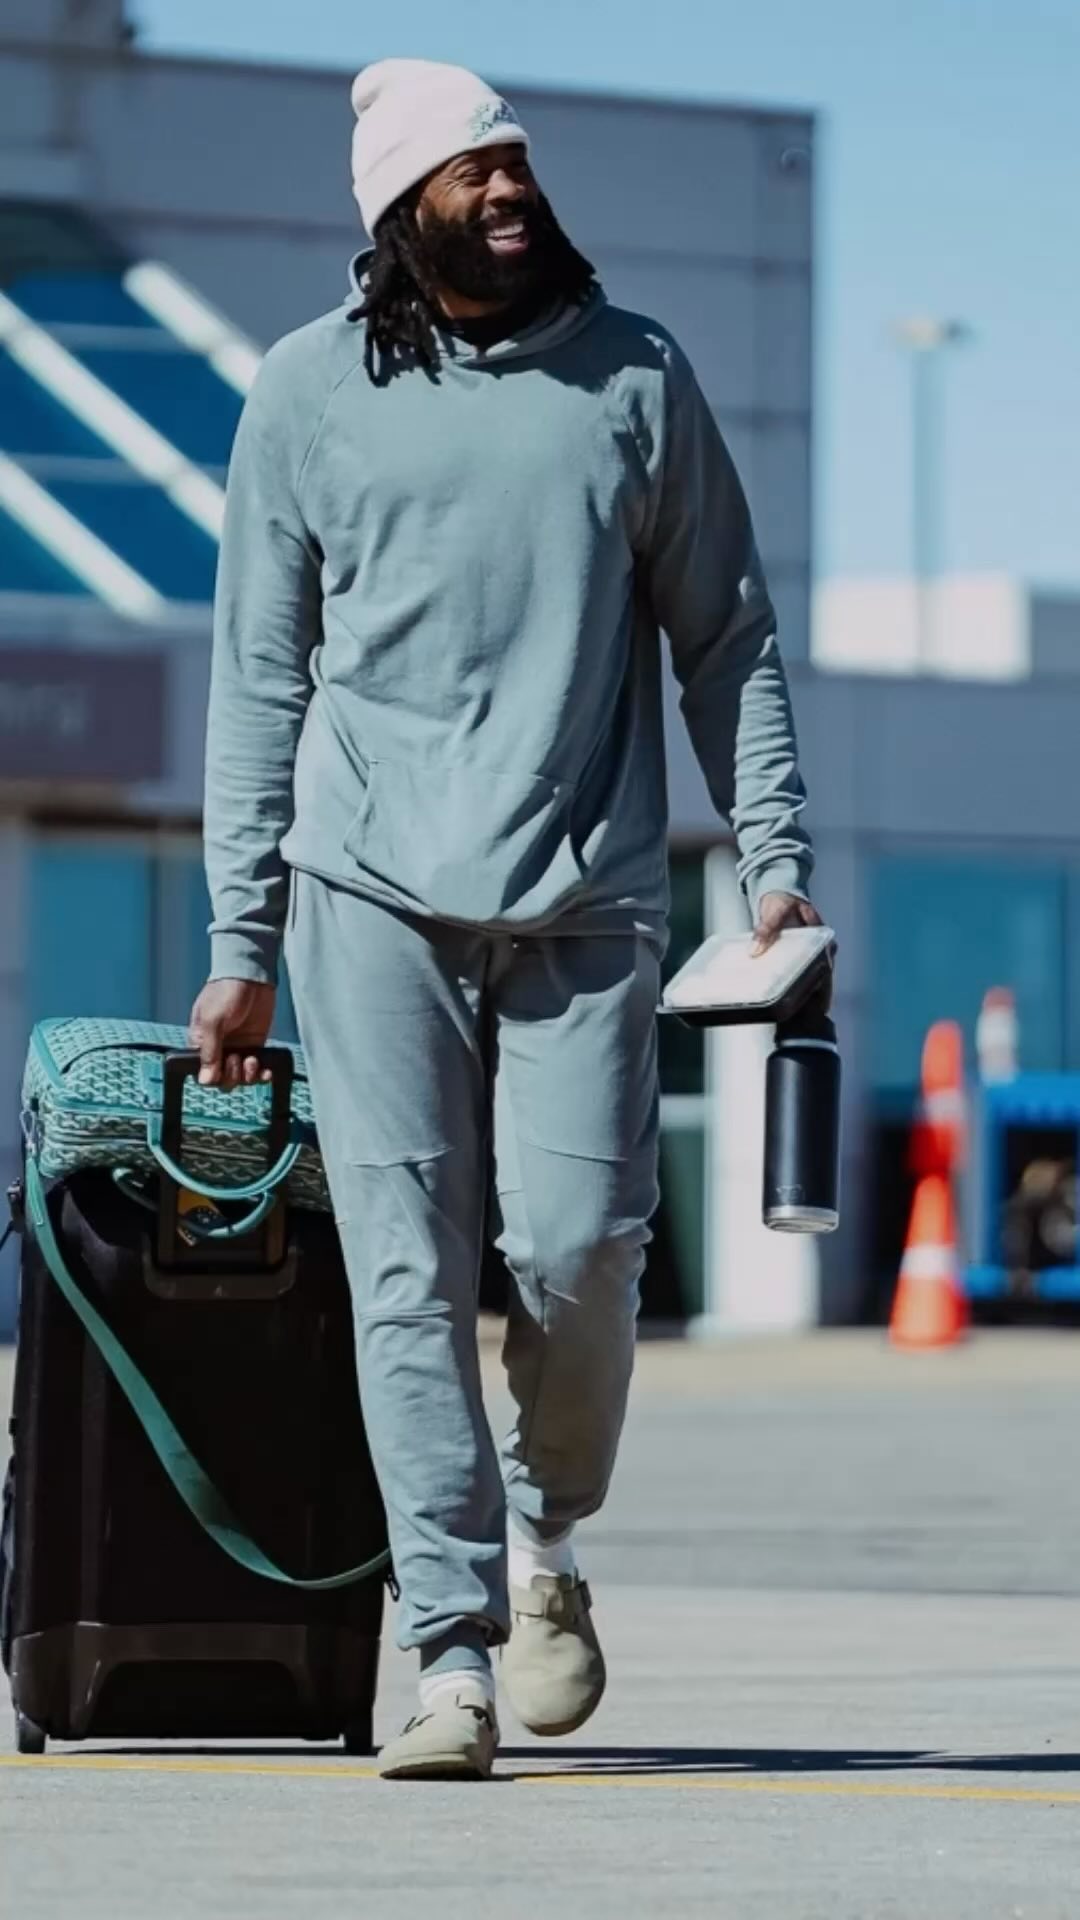 DeAndre Jordan has been traveling in style for 16 years. It’s one of the perks of being a world class athlete. We met up with the Denver nugget to talk all things travel. Where are his favorite destinations? What’s the NBA grind of non-stop travel at odd hours like? Click the link for an all access pass into the world of an NBA veteran who has seen his fair share of planet earth.